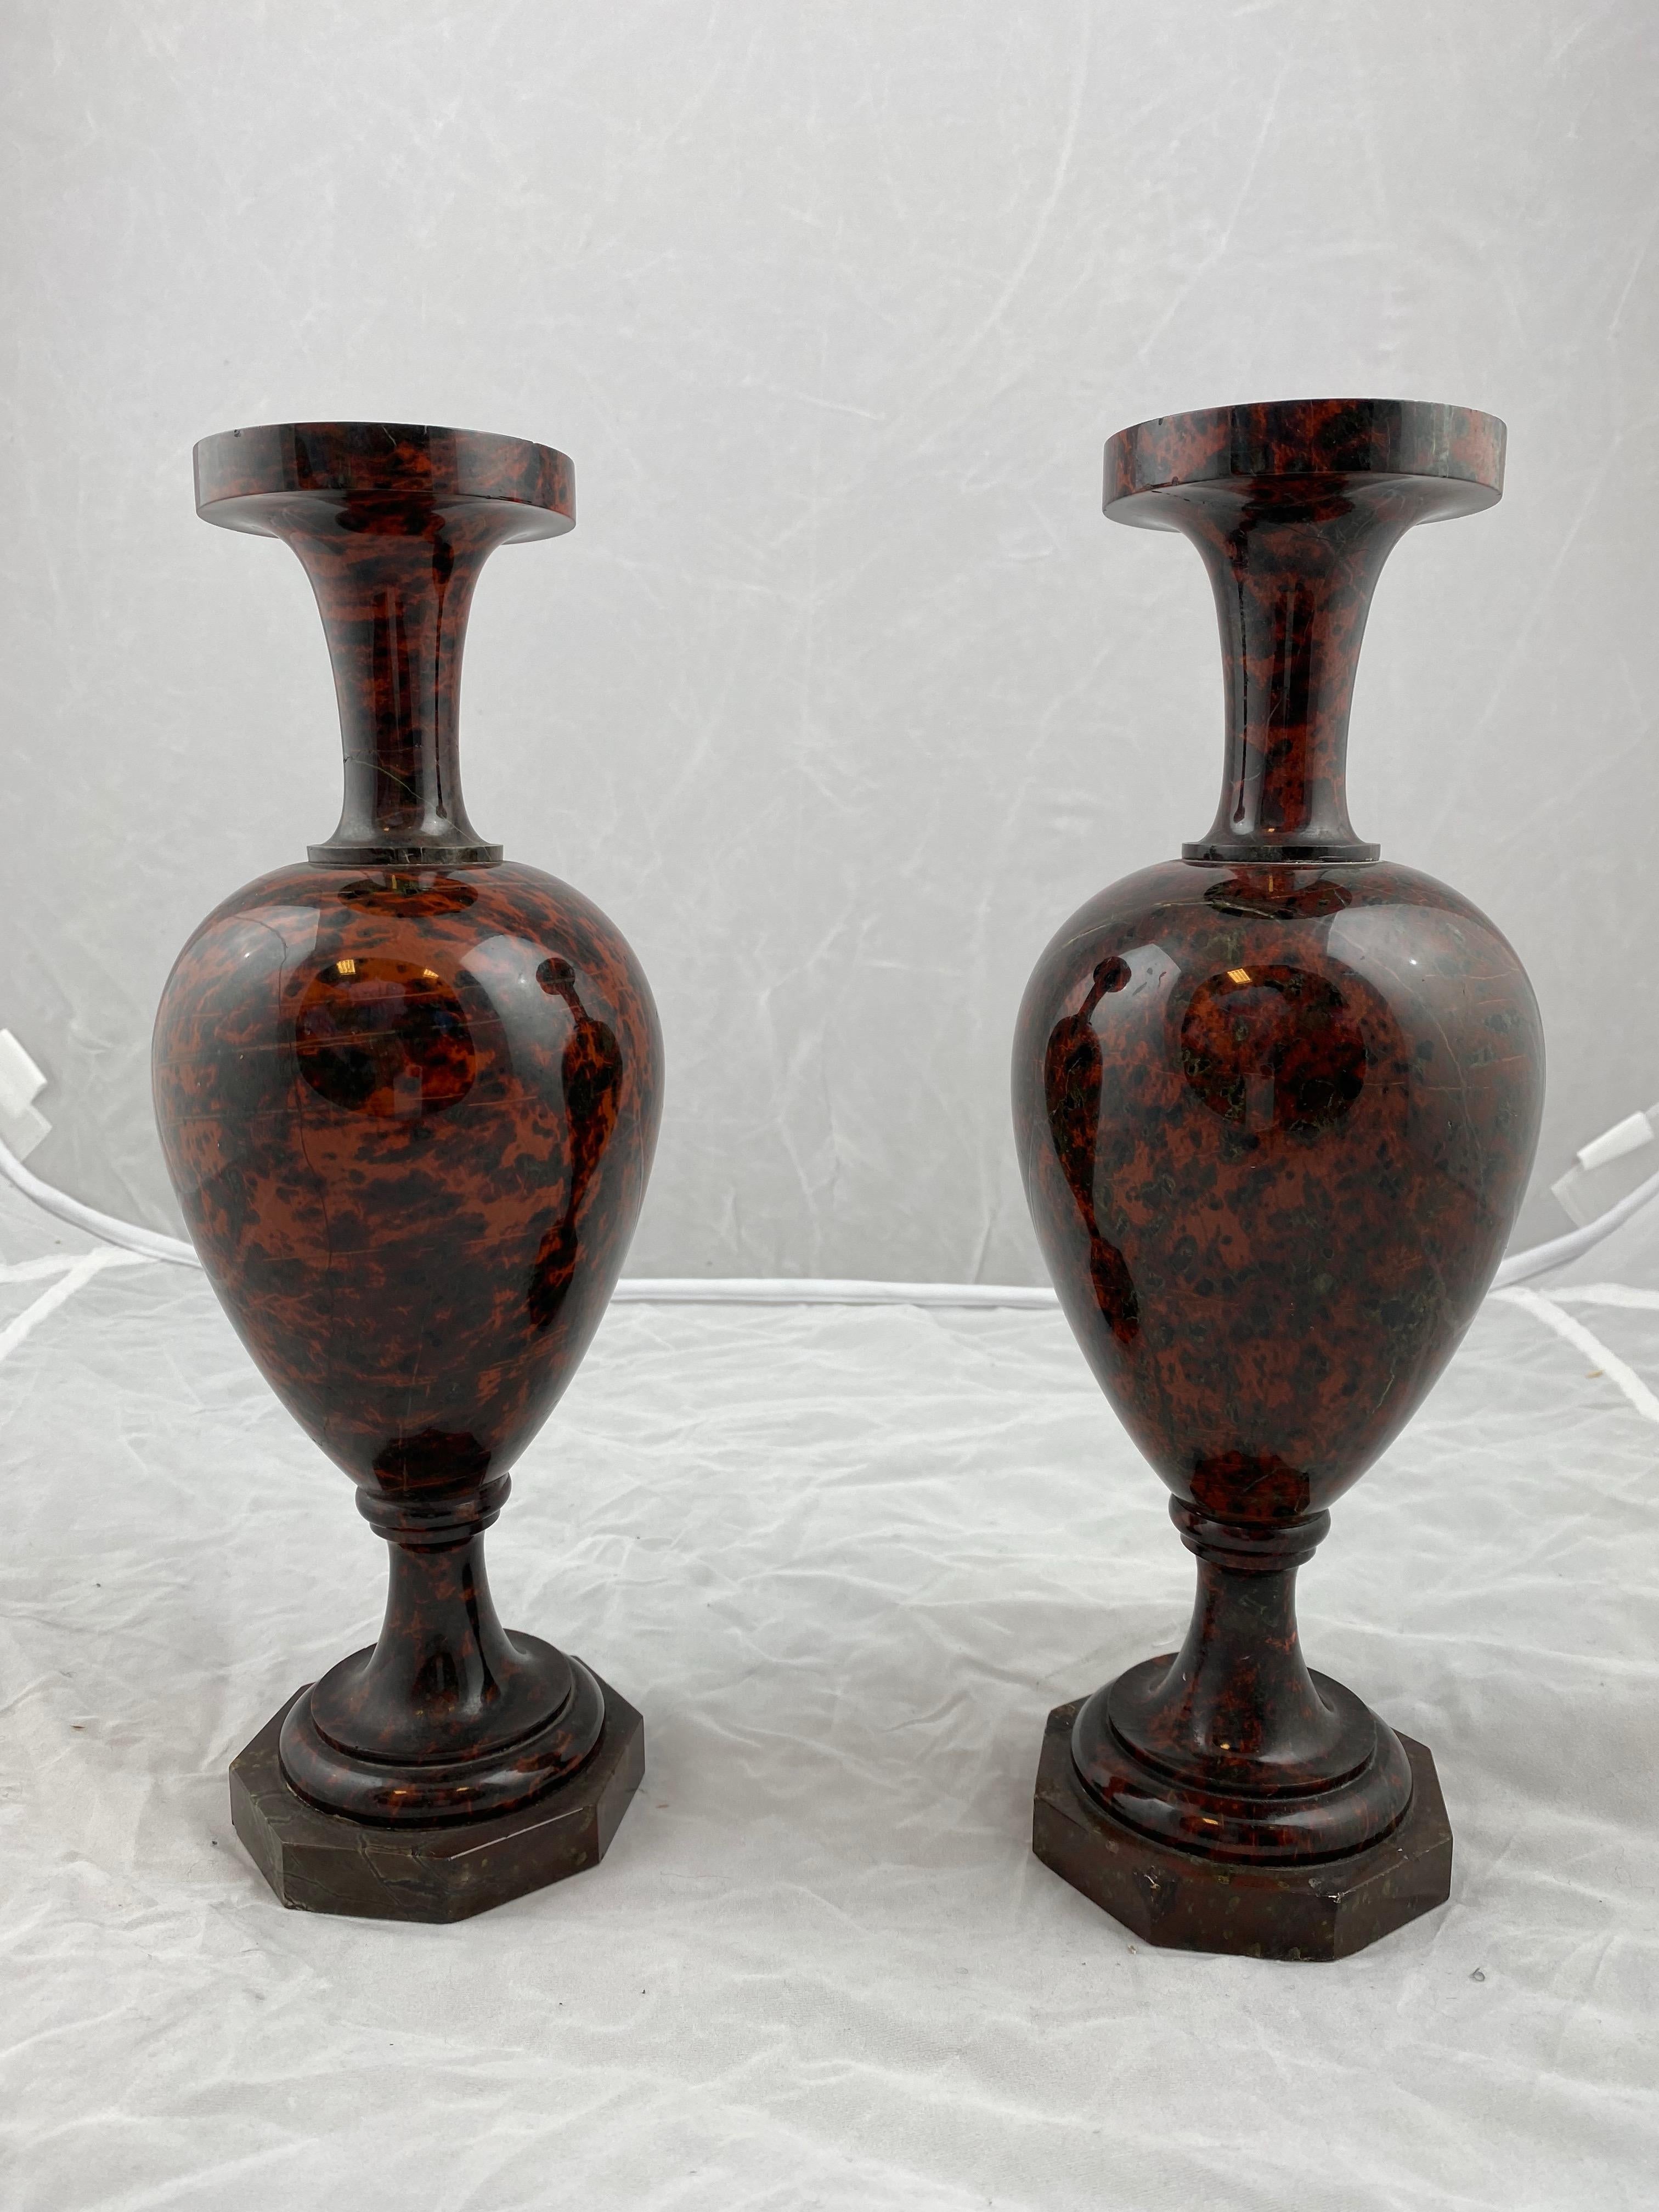 A beautiful pair of hardstone vases, probably Russian. Polished to a mirror like surface.